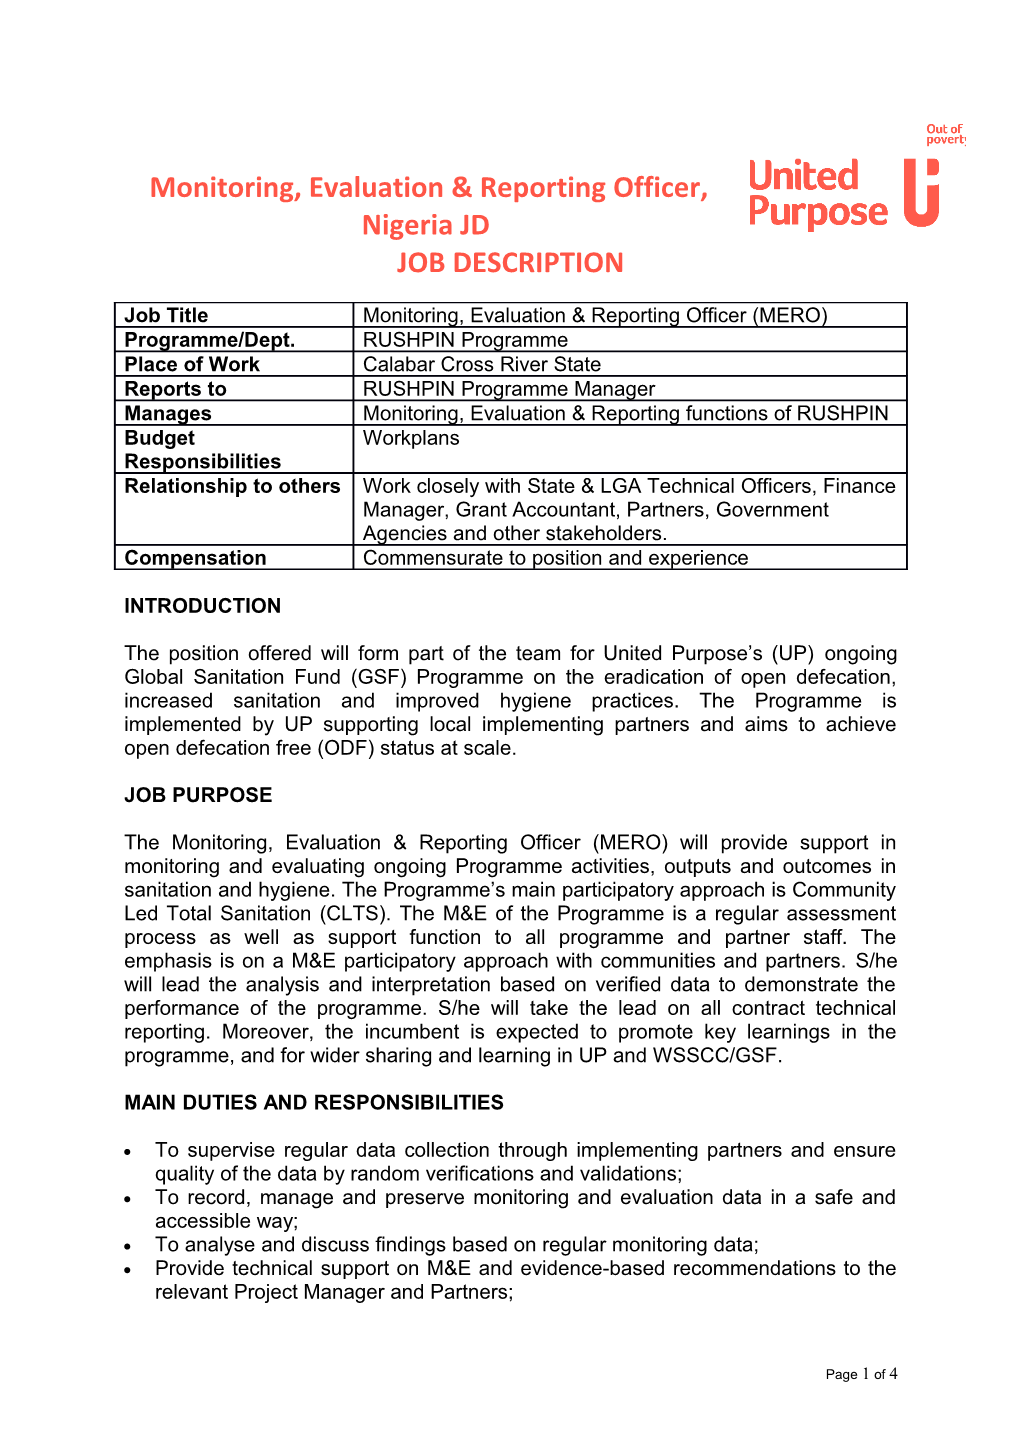 Monitoring, Evaluation & Reporting Officer, Nigeria JD